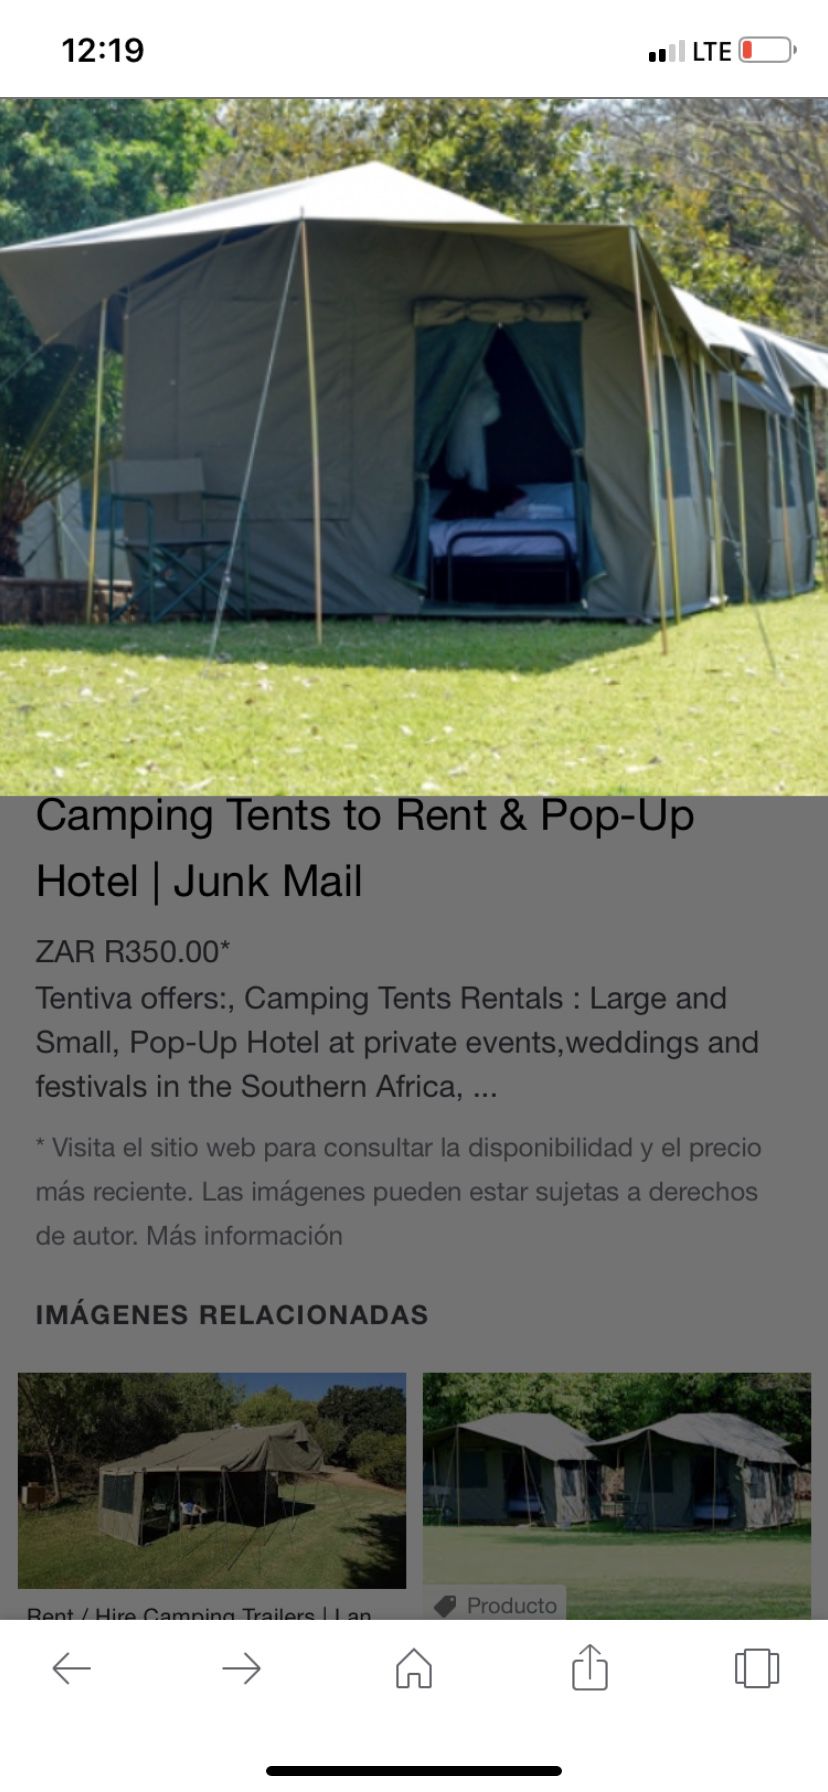 I am loking for tent camping